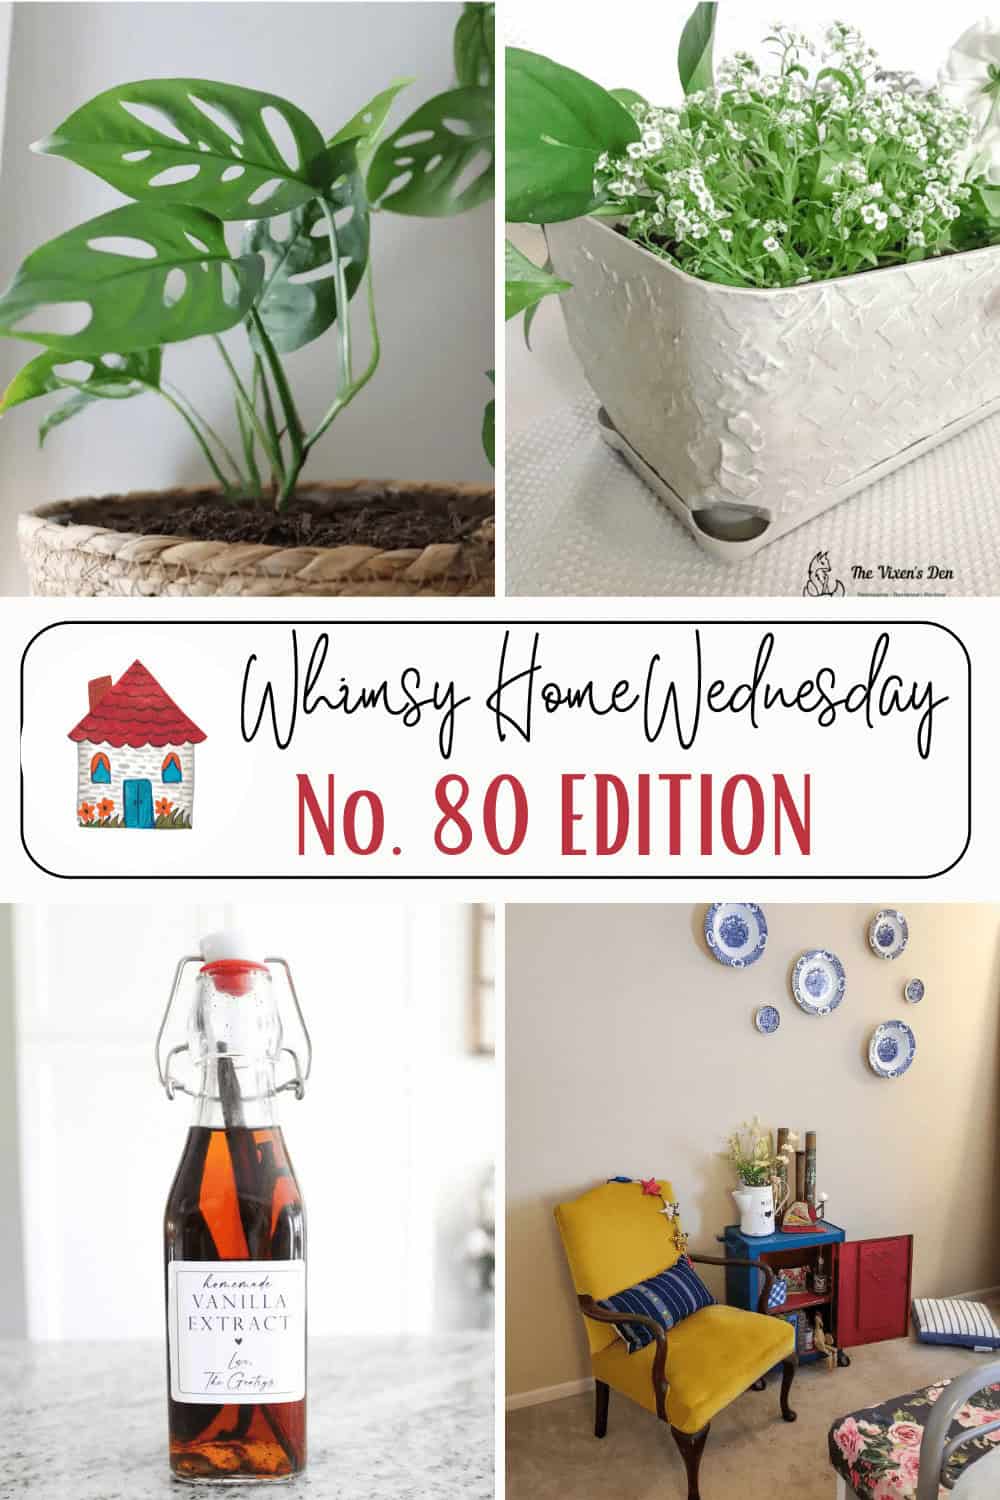 Whimsy Home Wednesday No. 80